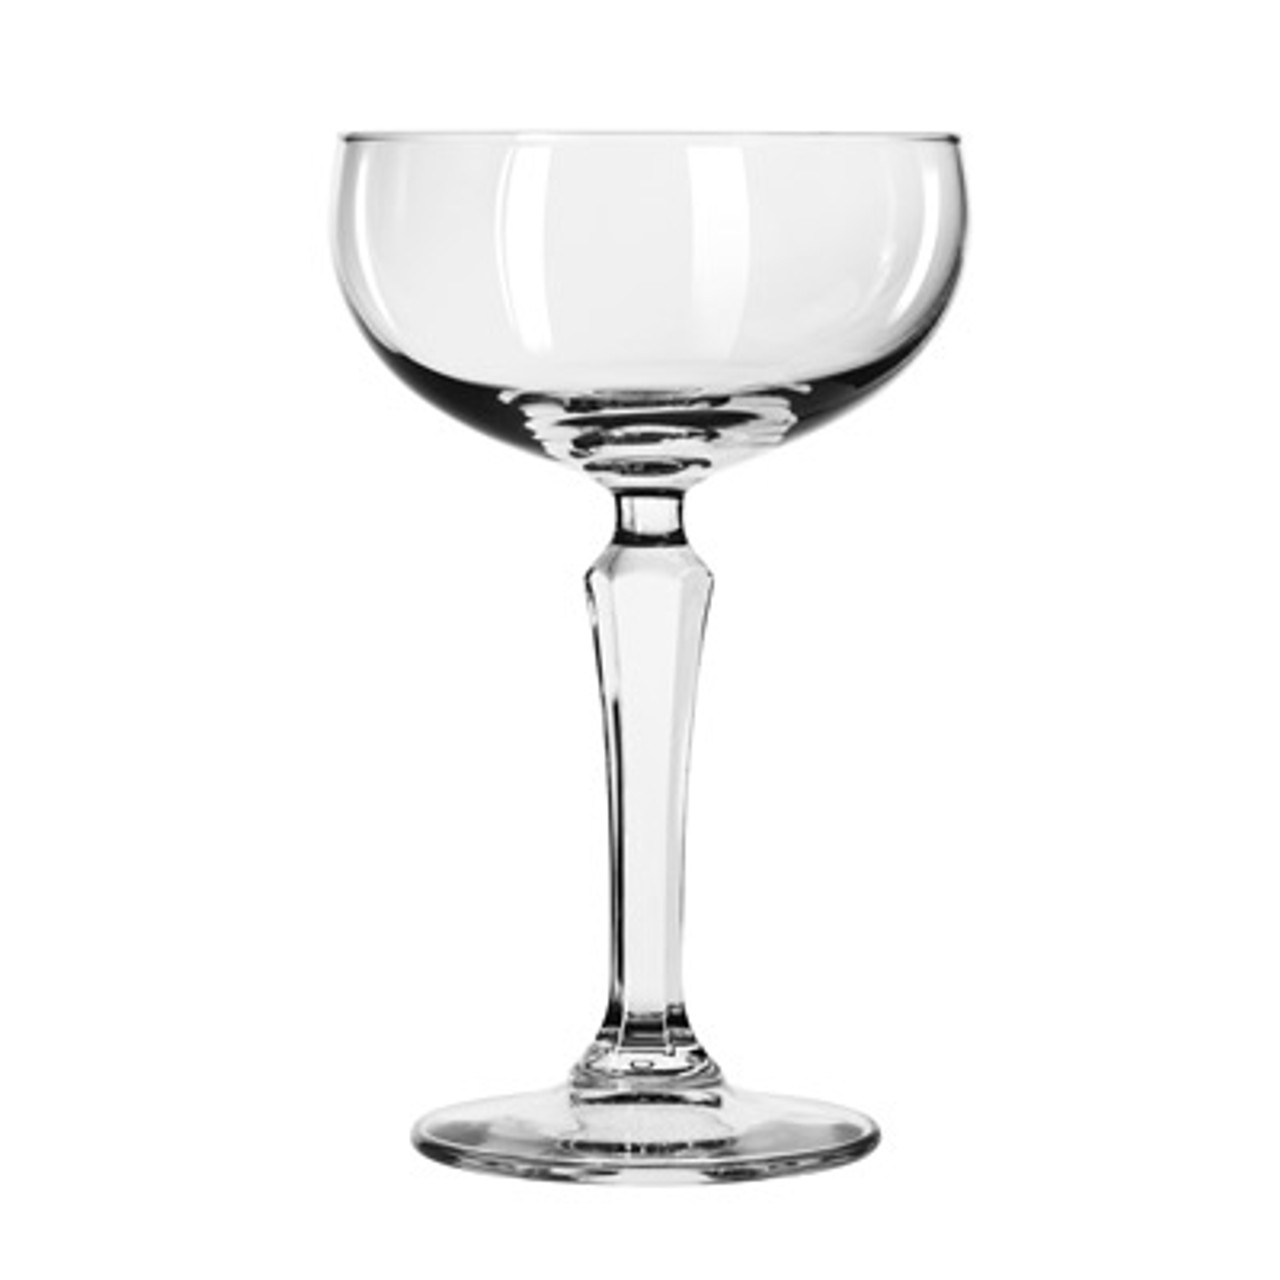 https://cdn11.bigcommerce.com/s-g3i86bef61/images/stencil/1280x1280/products/1064/2126/Libbey-601602-Martini-Glass__83723.1663868436.jpg?c=1